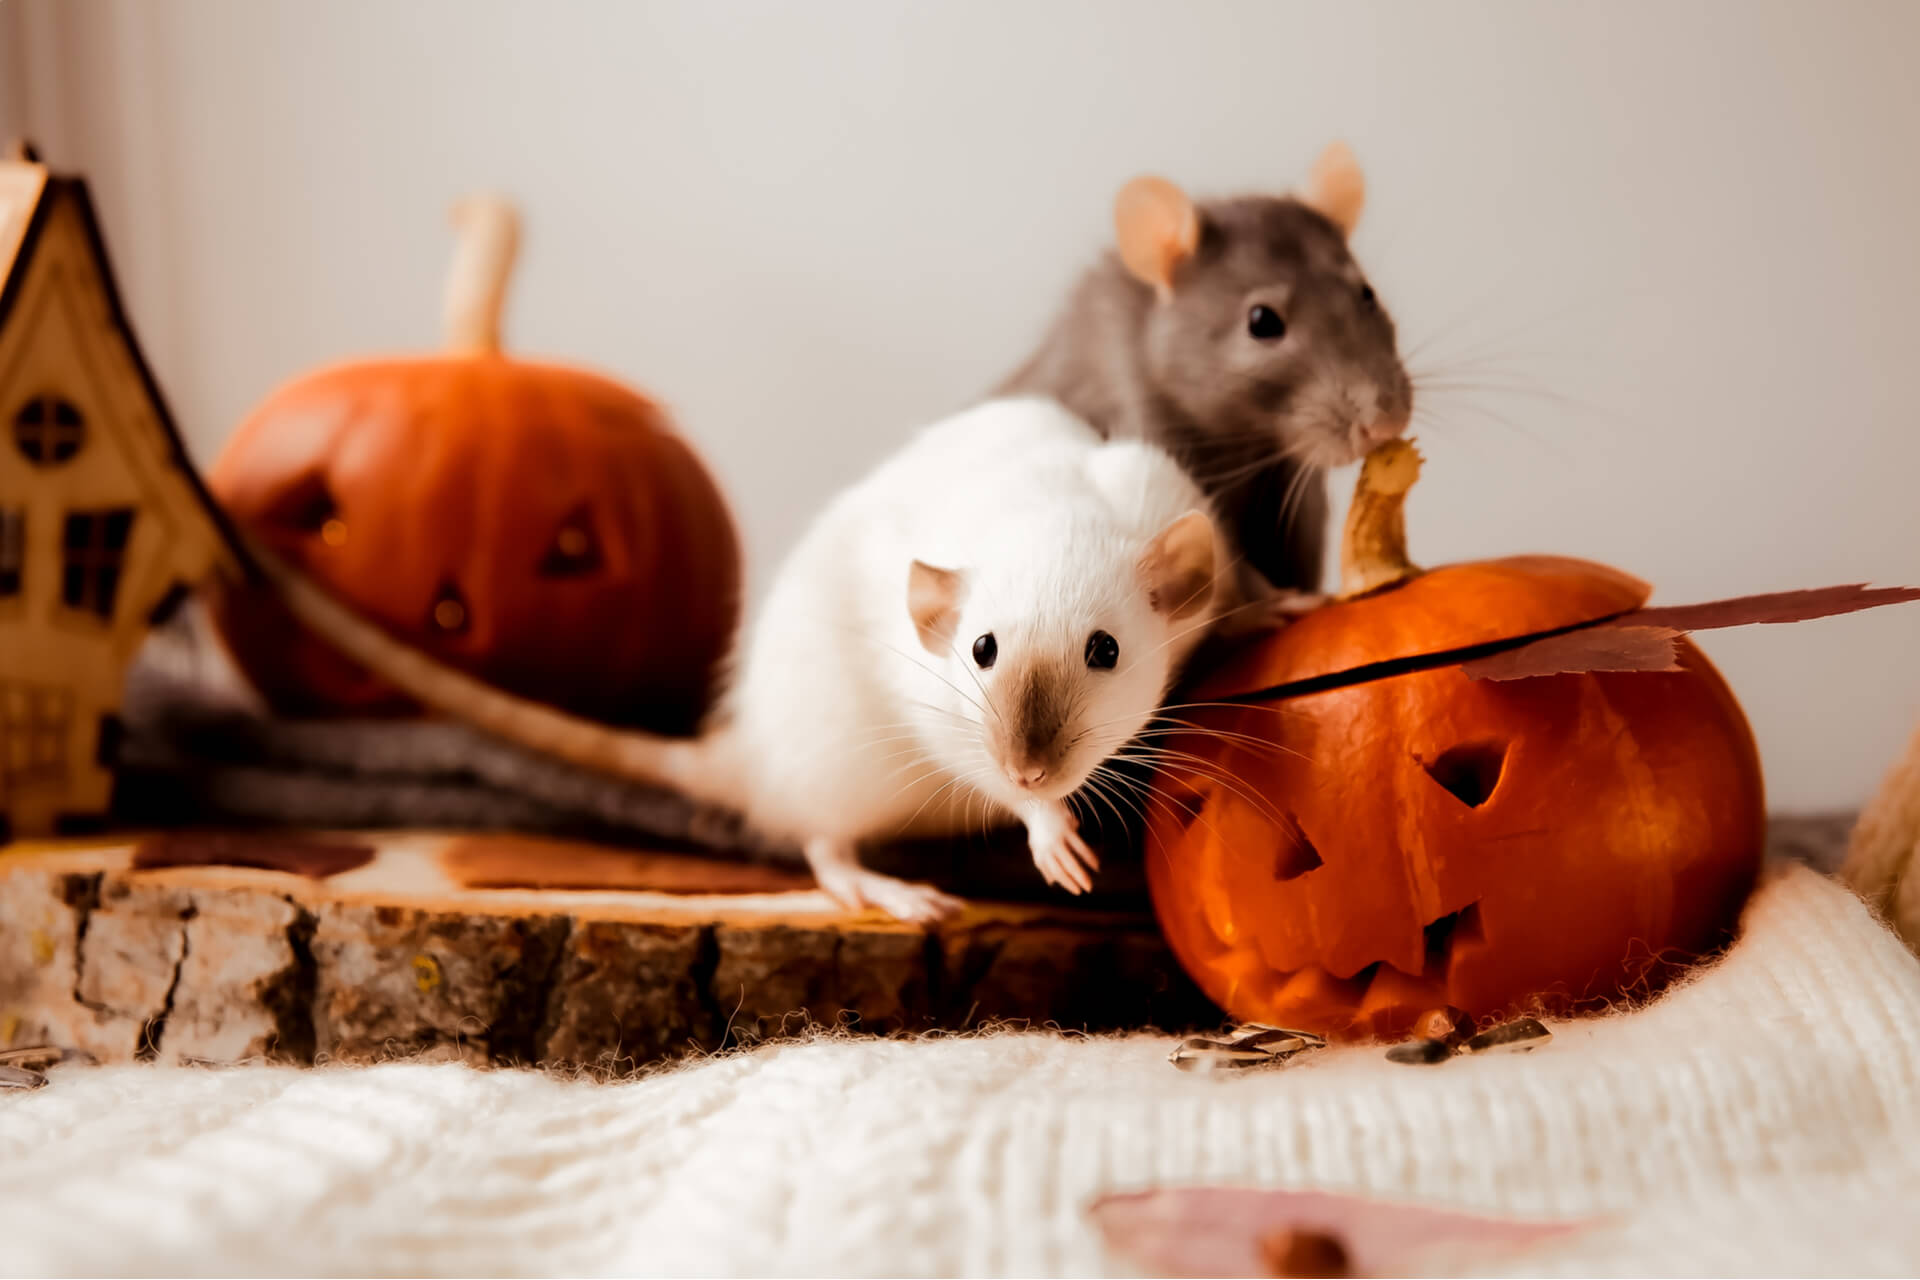 Mice Crawling Over Halloween Pumpkins In Dfw Home